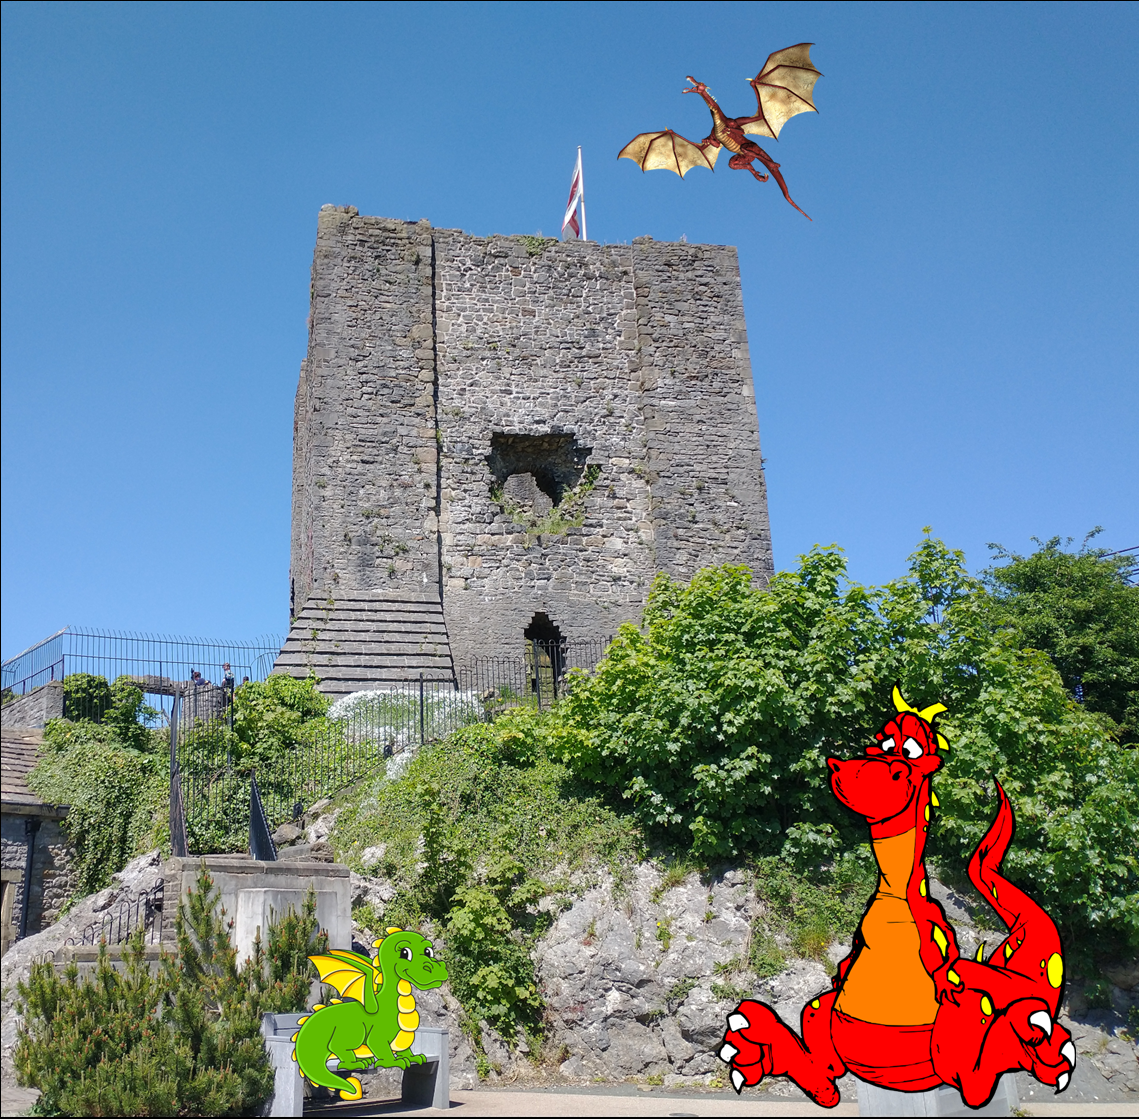 Image of Clitheroe Castle and superimposed characters of dragons